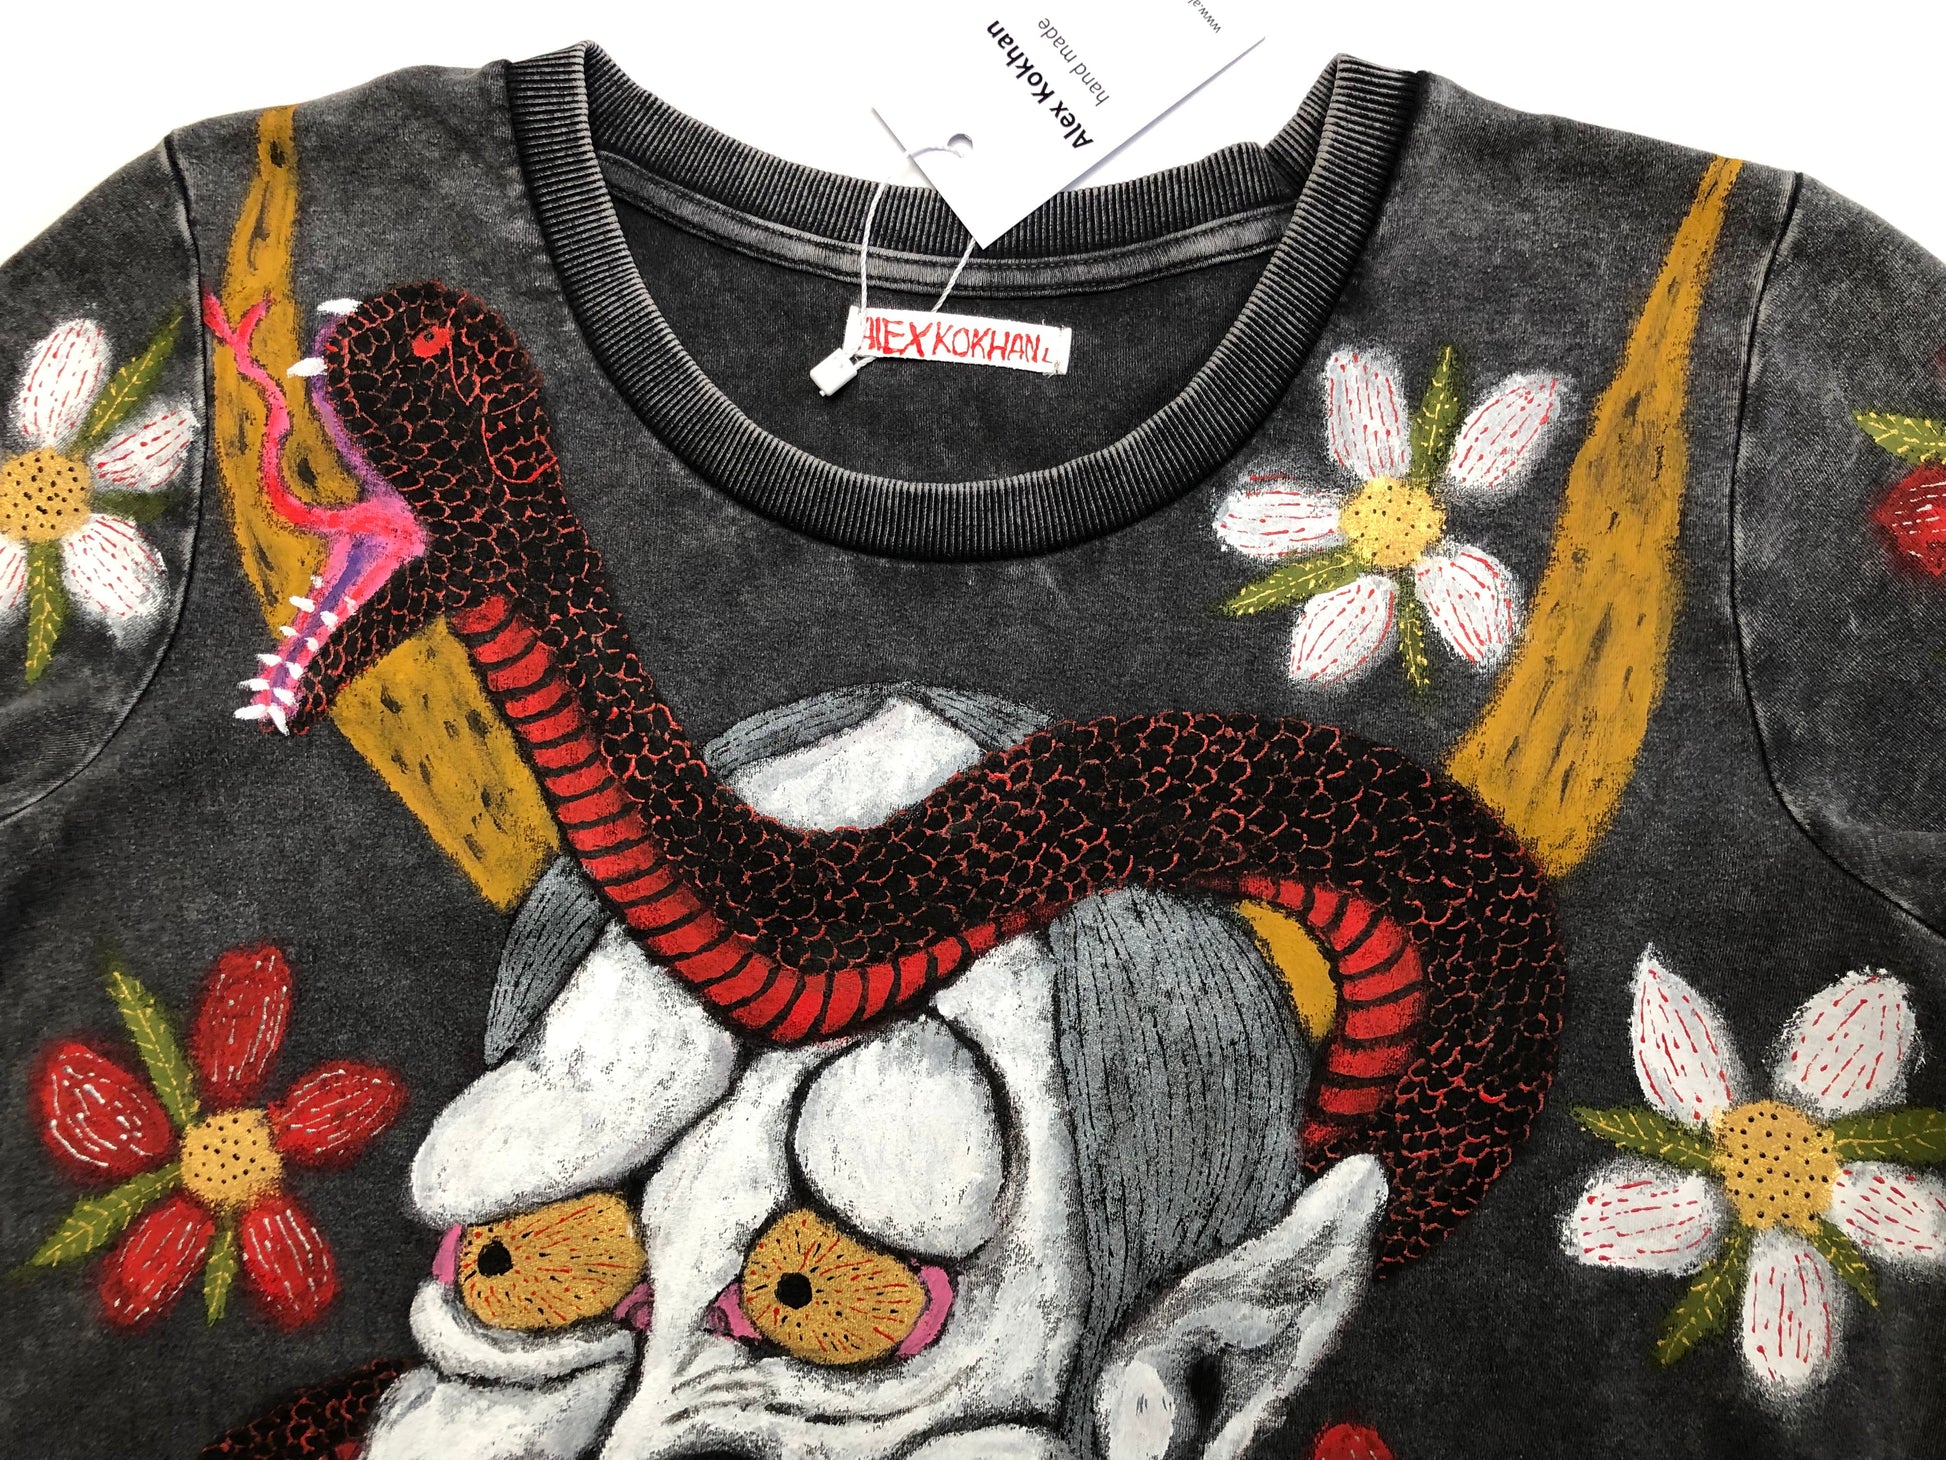 The upper part of the T -shirt with a demon, snake and floral design